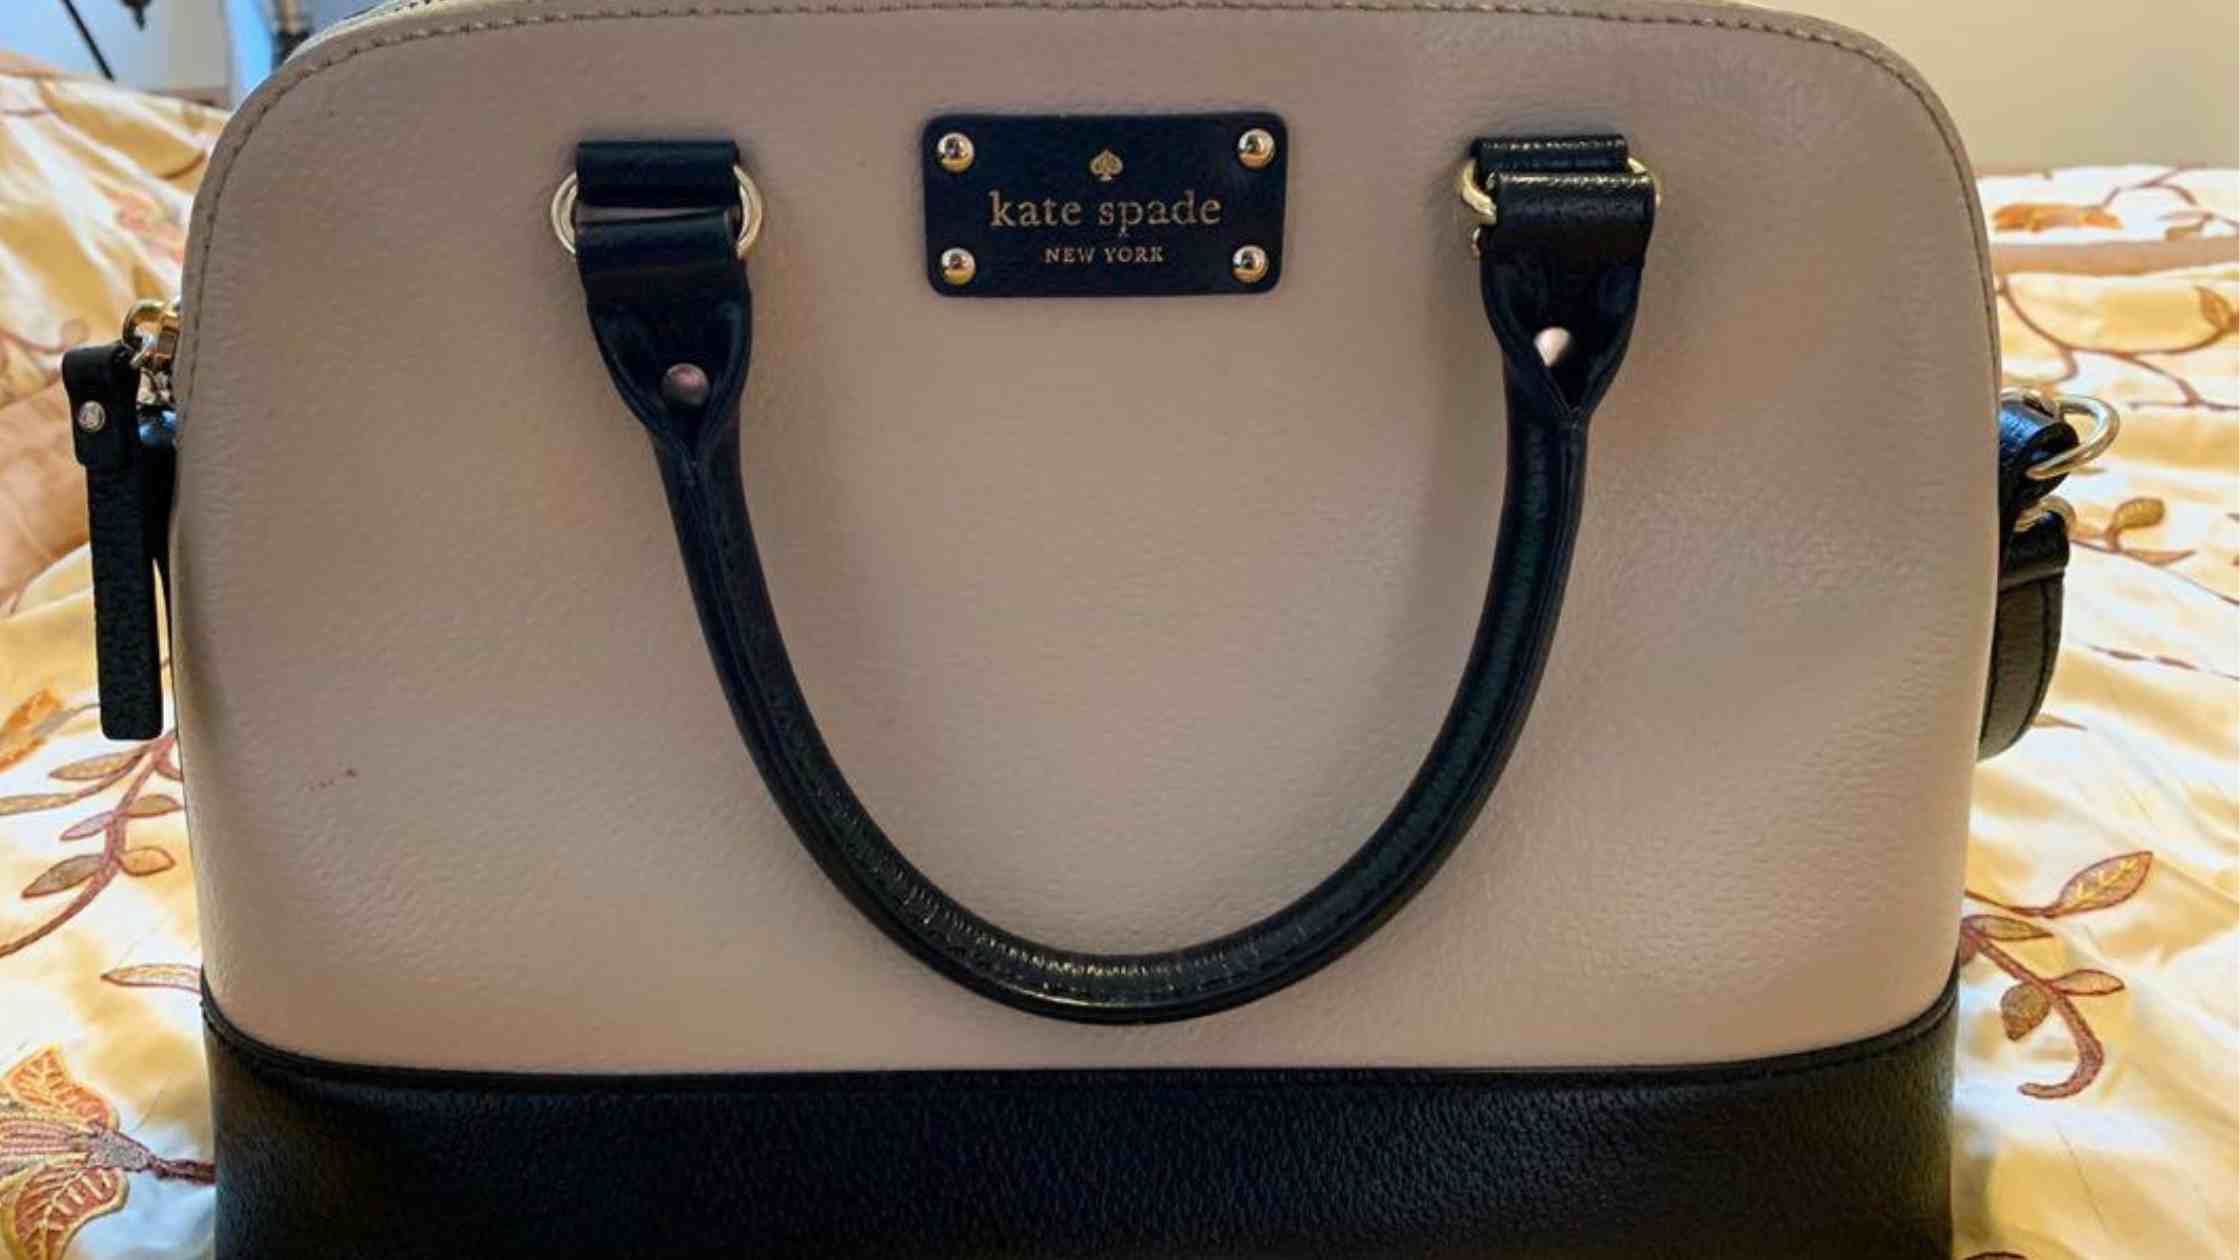 Kate Spade Discontinued Handbags - Where you find?